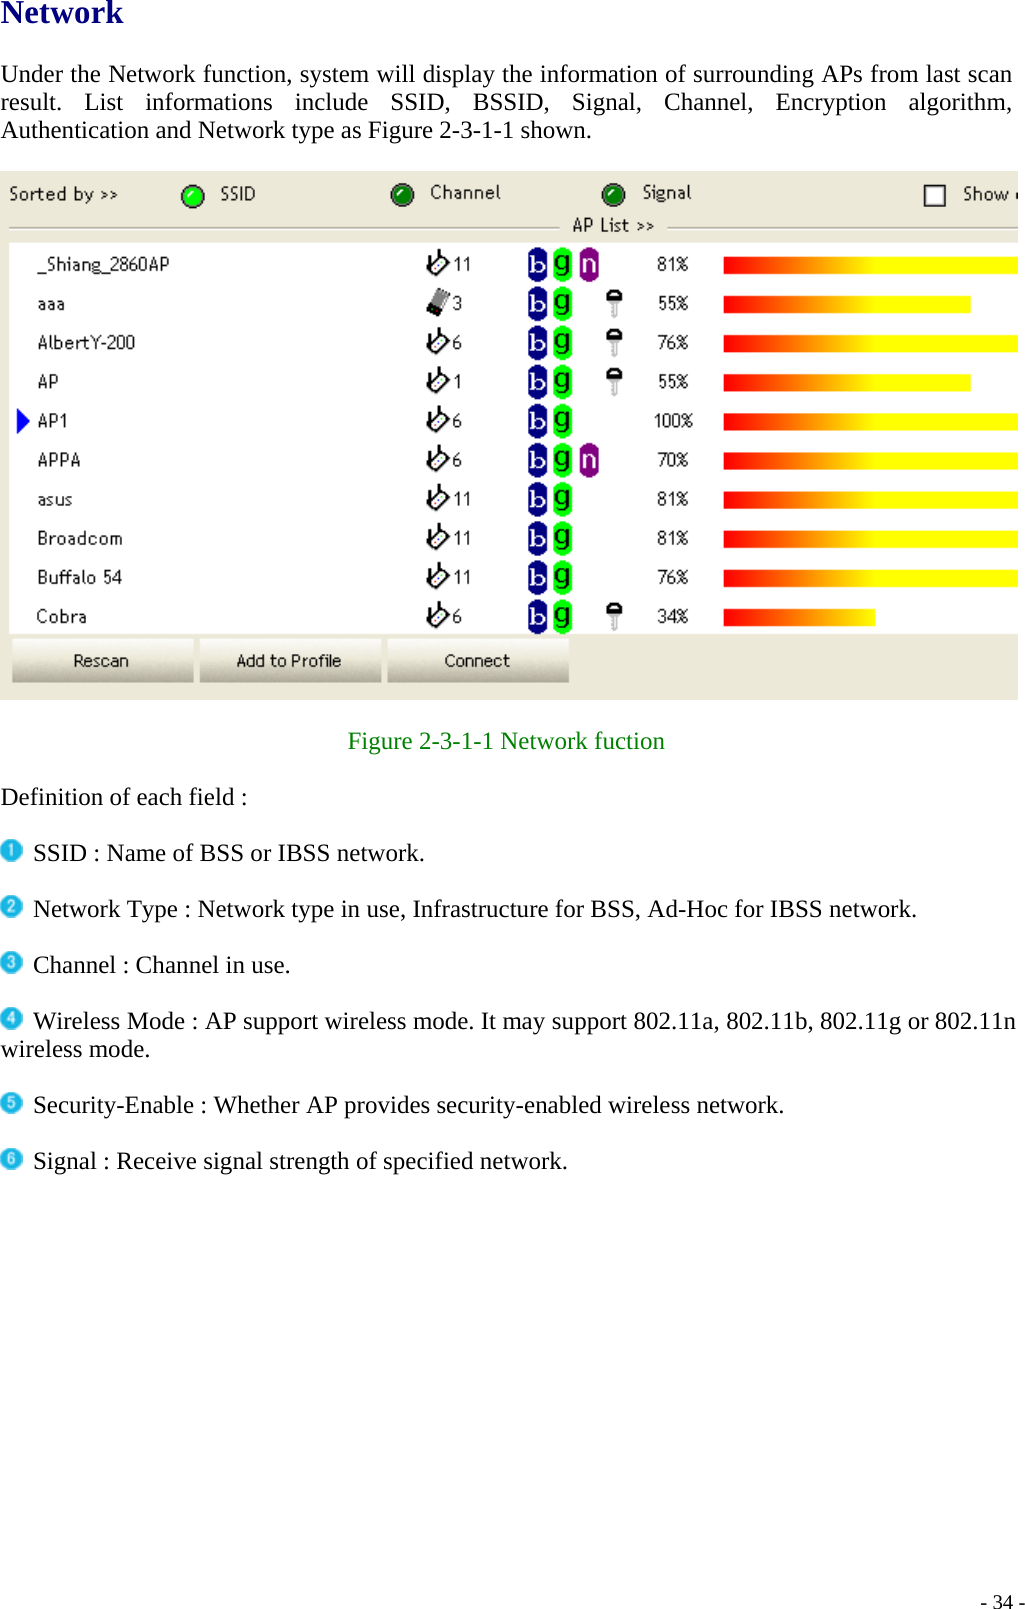 Network  Under the Network function, system will display the information of surrounding APs from last scan result. List informations include SSID, BSSID, Signal, Channel, Encryption algorithm, Authentication and Network type as Figure 2-3-1-1 shown.    Figure 2-3-1-1 Network fuction  Definition of each field :   SSID : Name of BSS or IBSS network.   Network Type : Network type in use, Infrastructure for BSS, Ad-Hoc for IBSS network.   Channel : Channel in use.   Wireless Mode : AP support wireless mode. It may support 802.11a, 802.11b, 802.11g or 802.11n wireless mode.   Security-Enable : Whether AP provides security-enabled wireless network.   Signal : Receive signal strength of specified network.      - 34 -